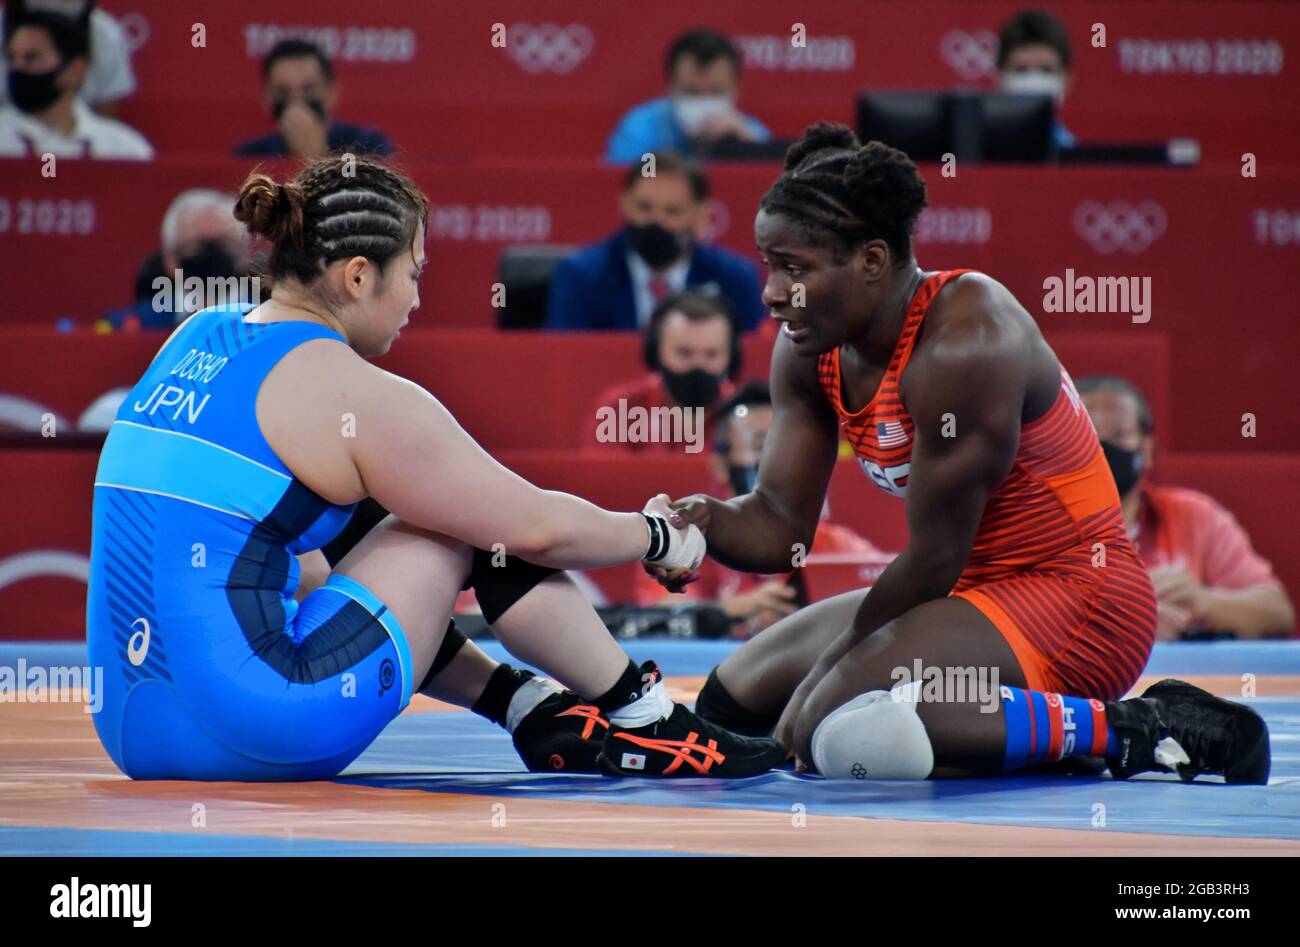 Tokyo, Japan. 02nd Aug, 2021. USA's Tamyra Marianna Stock Mensah defeats Japan's Sara Dosho in the Quarter final during the Tokyo Olympics Wrestling Women's freestyle 68kg competition at the Makuhari Messe in Chiba-Prefecture, Japan on Monday, August 2, 2021. Photo by Keizo Mori/UPI Credit: UPI/Alamy Live News Stock Photo